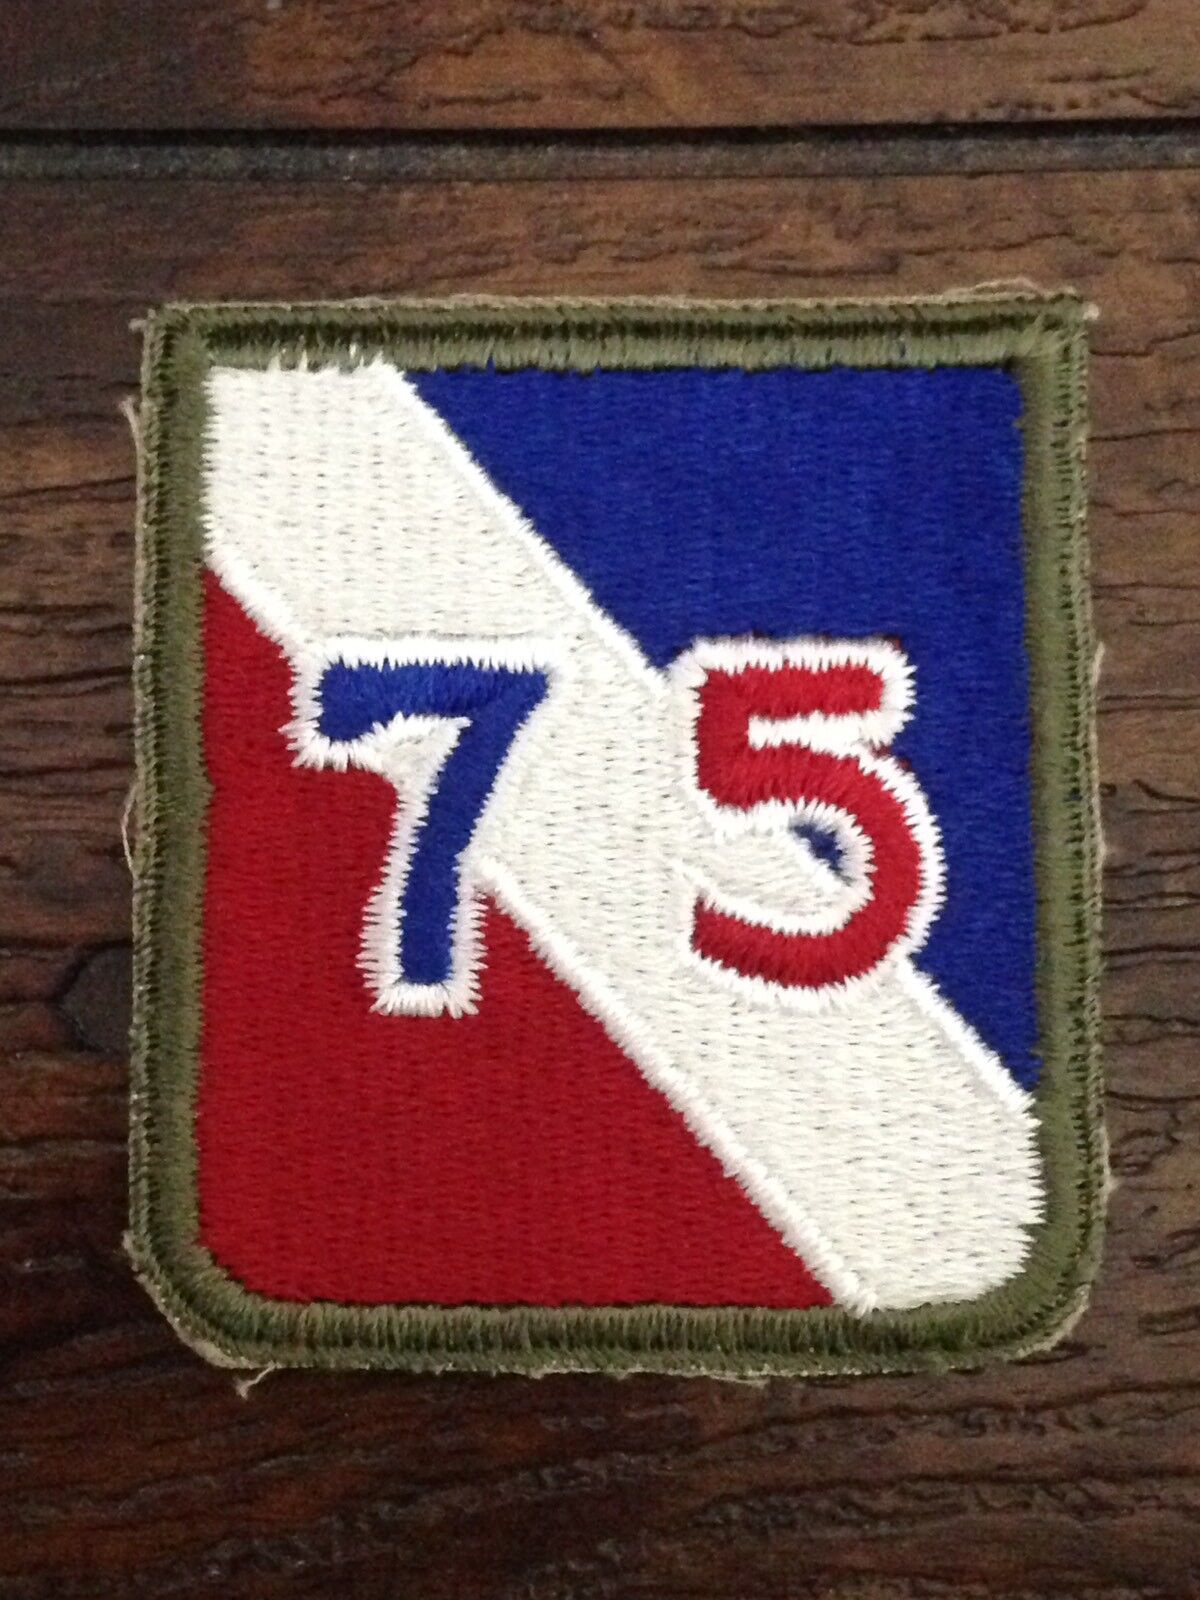 Original Army WWII 75th Infantry Division Military Patch Vintage Patches #1